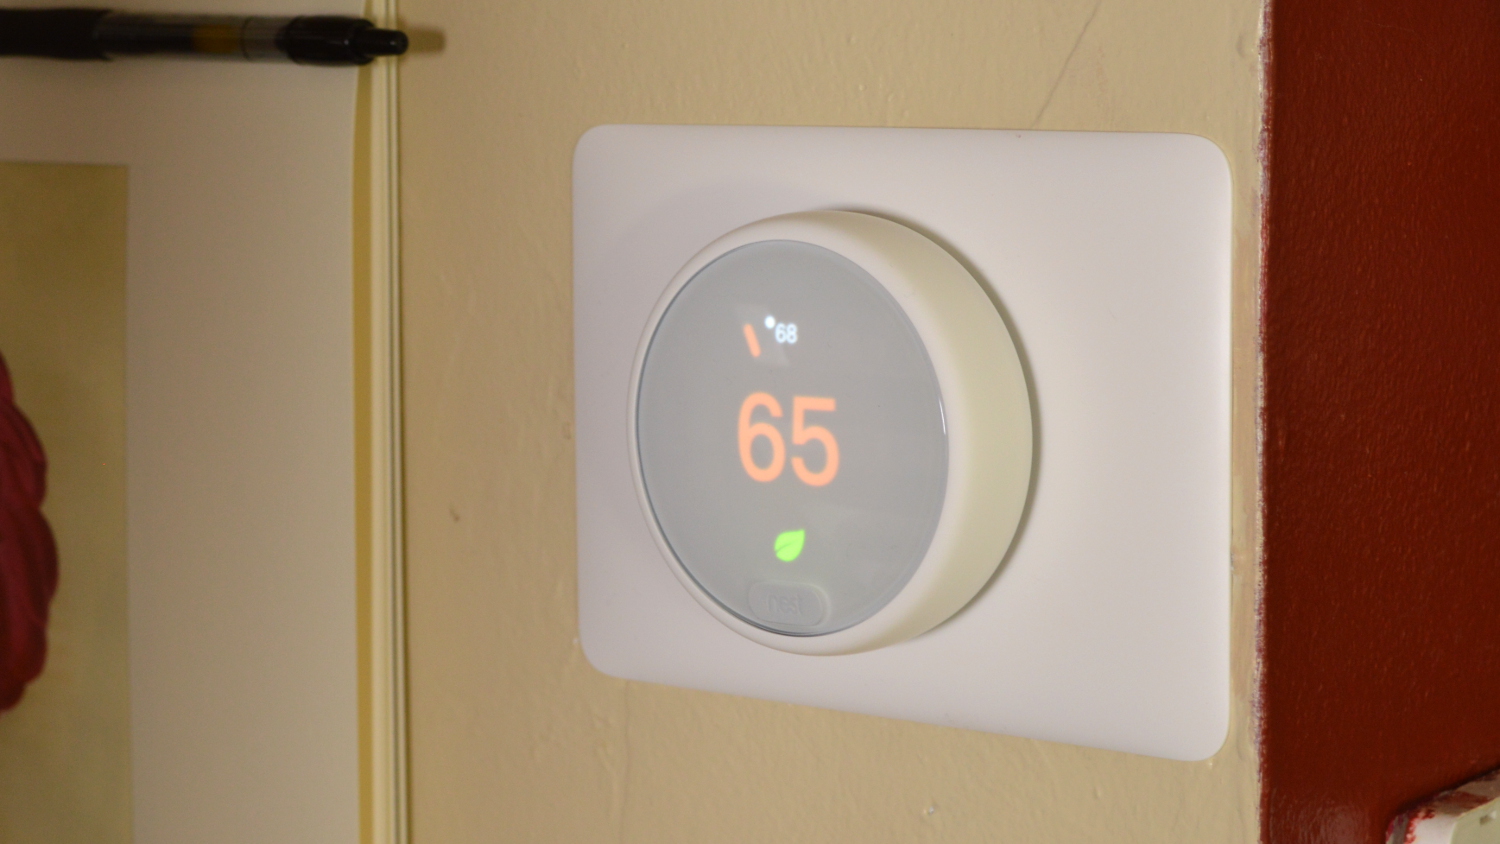 download nest thermostat